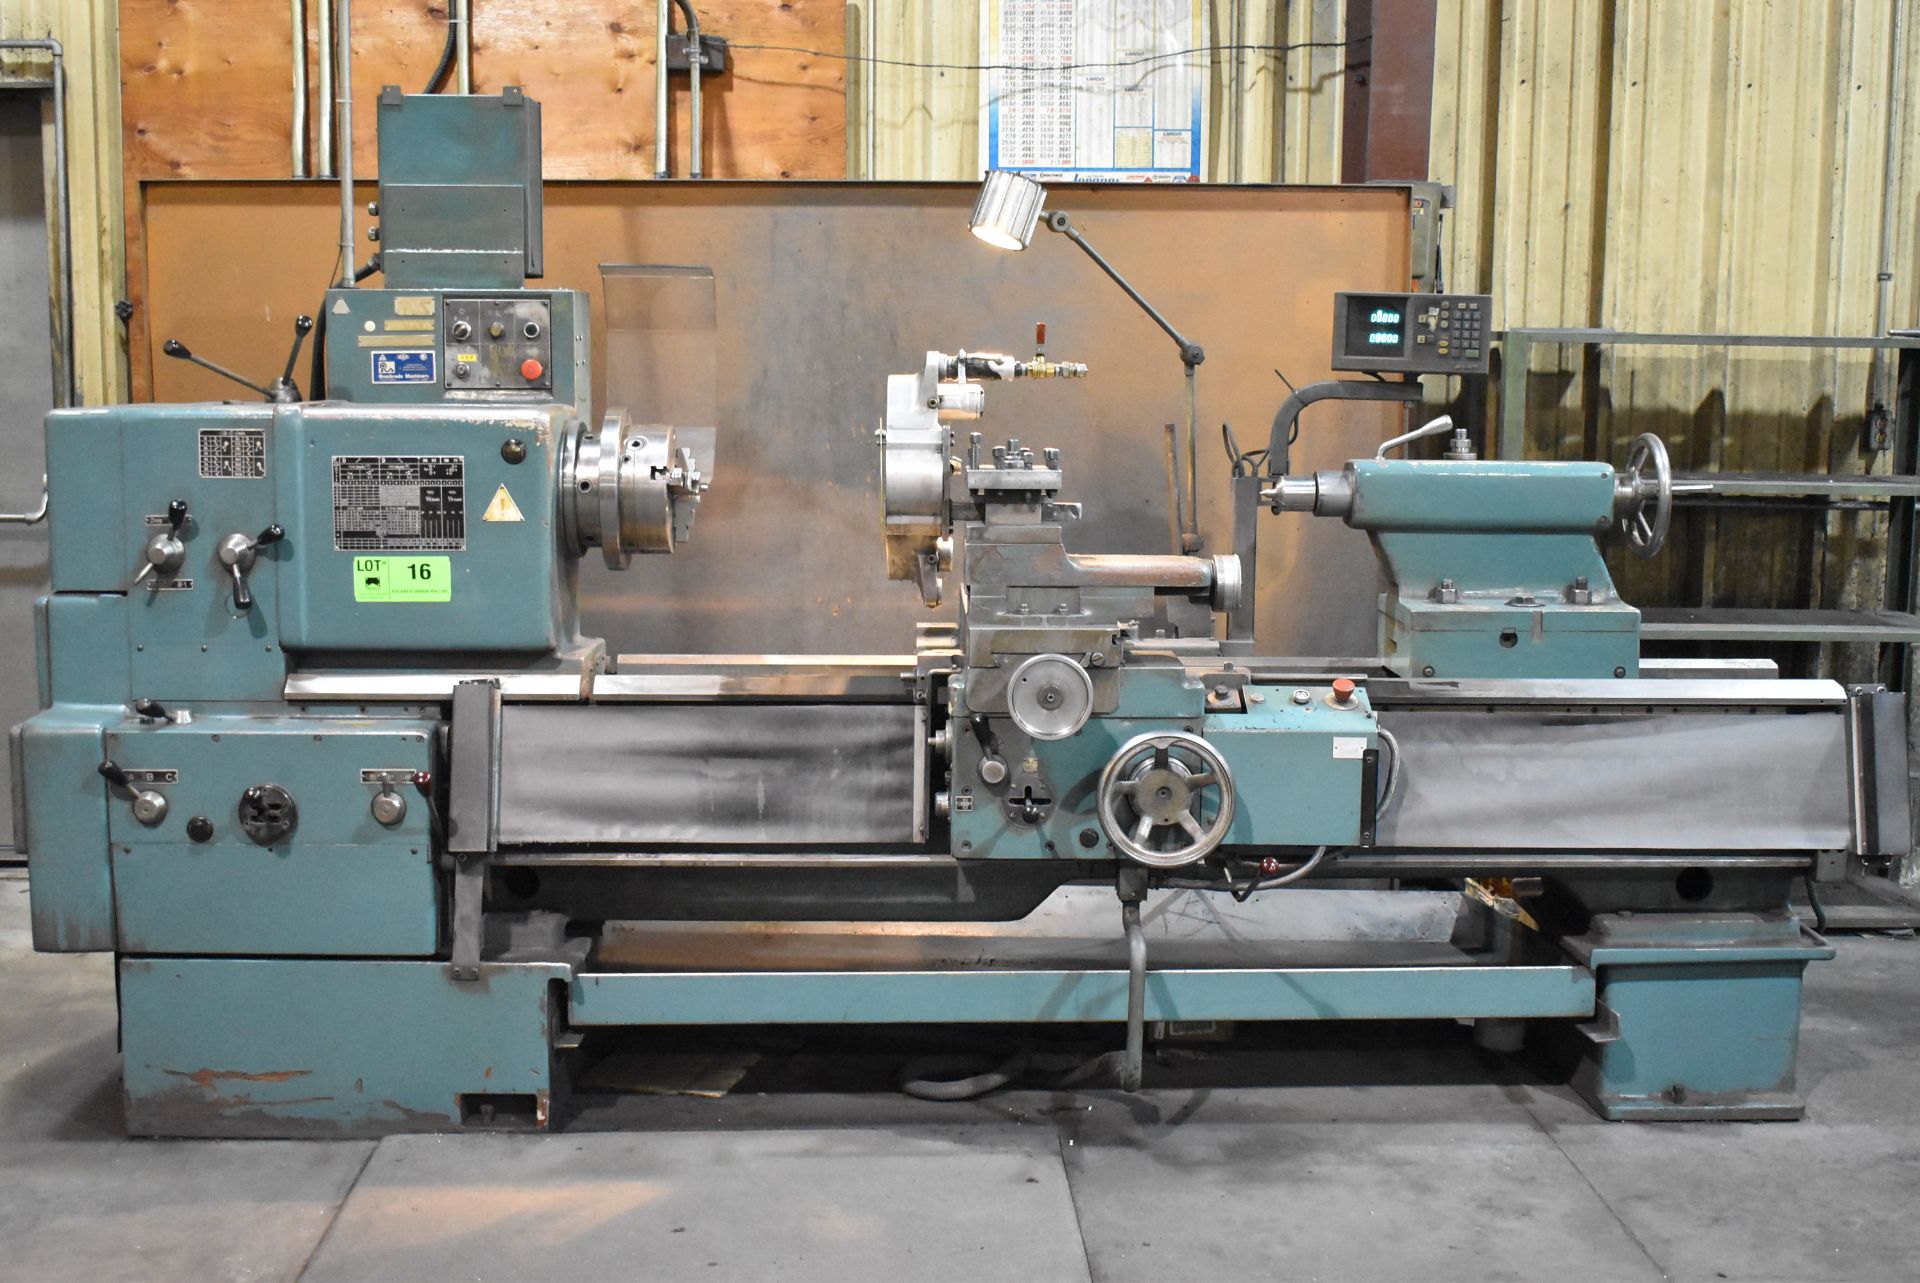 TOS SN 71 C GAP BED ENGINE LATHE WITH 26" SWING, 65" BETWEEN CENTERS, 3" SPINDLE BORE, SPEEDS TO